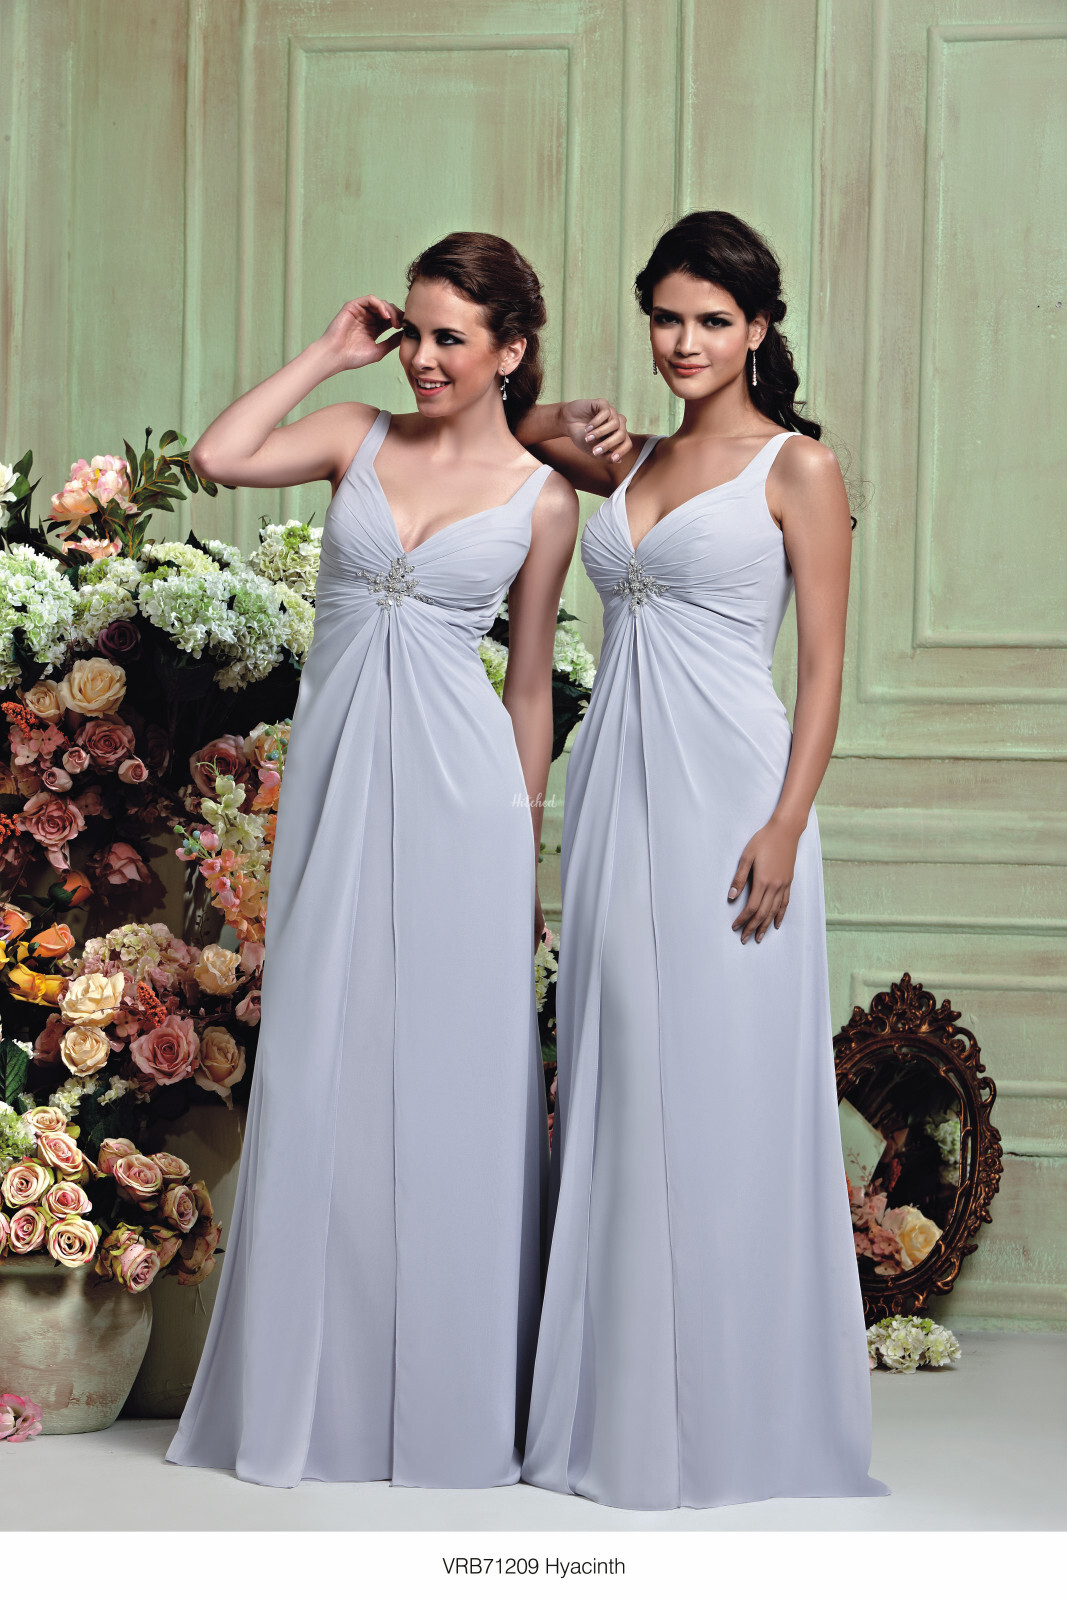 VRB71209 Hyacinth Bridesmaid Dress from Veromia Bridesmaids - hitched.ie